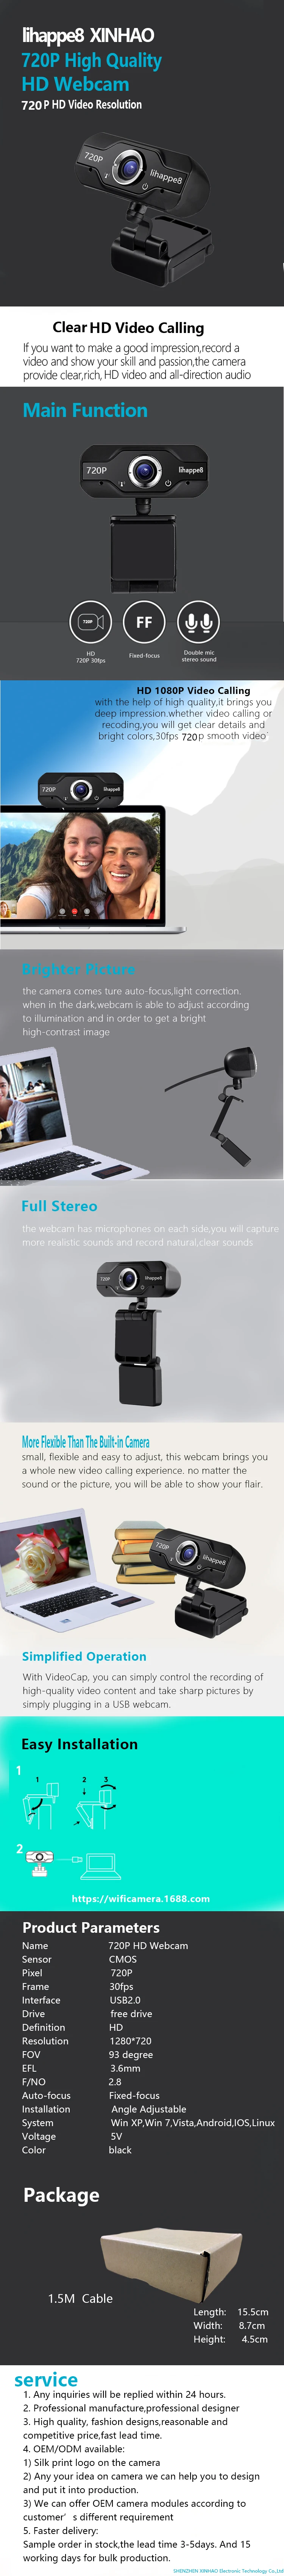 Hot selling web camera lihappe8 camera webcam with mic hd webcam usb 720p for pc laptop